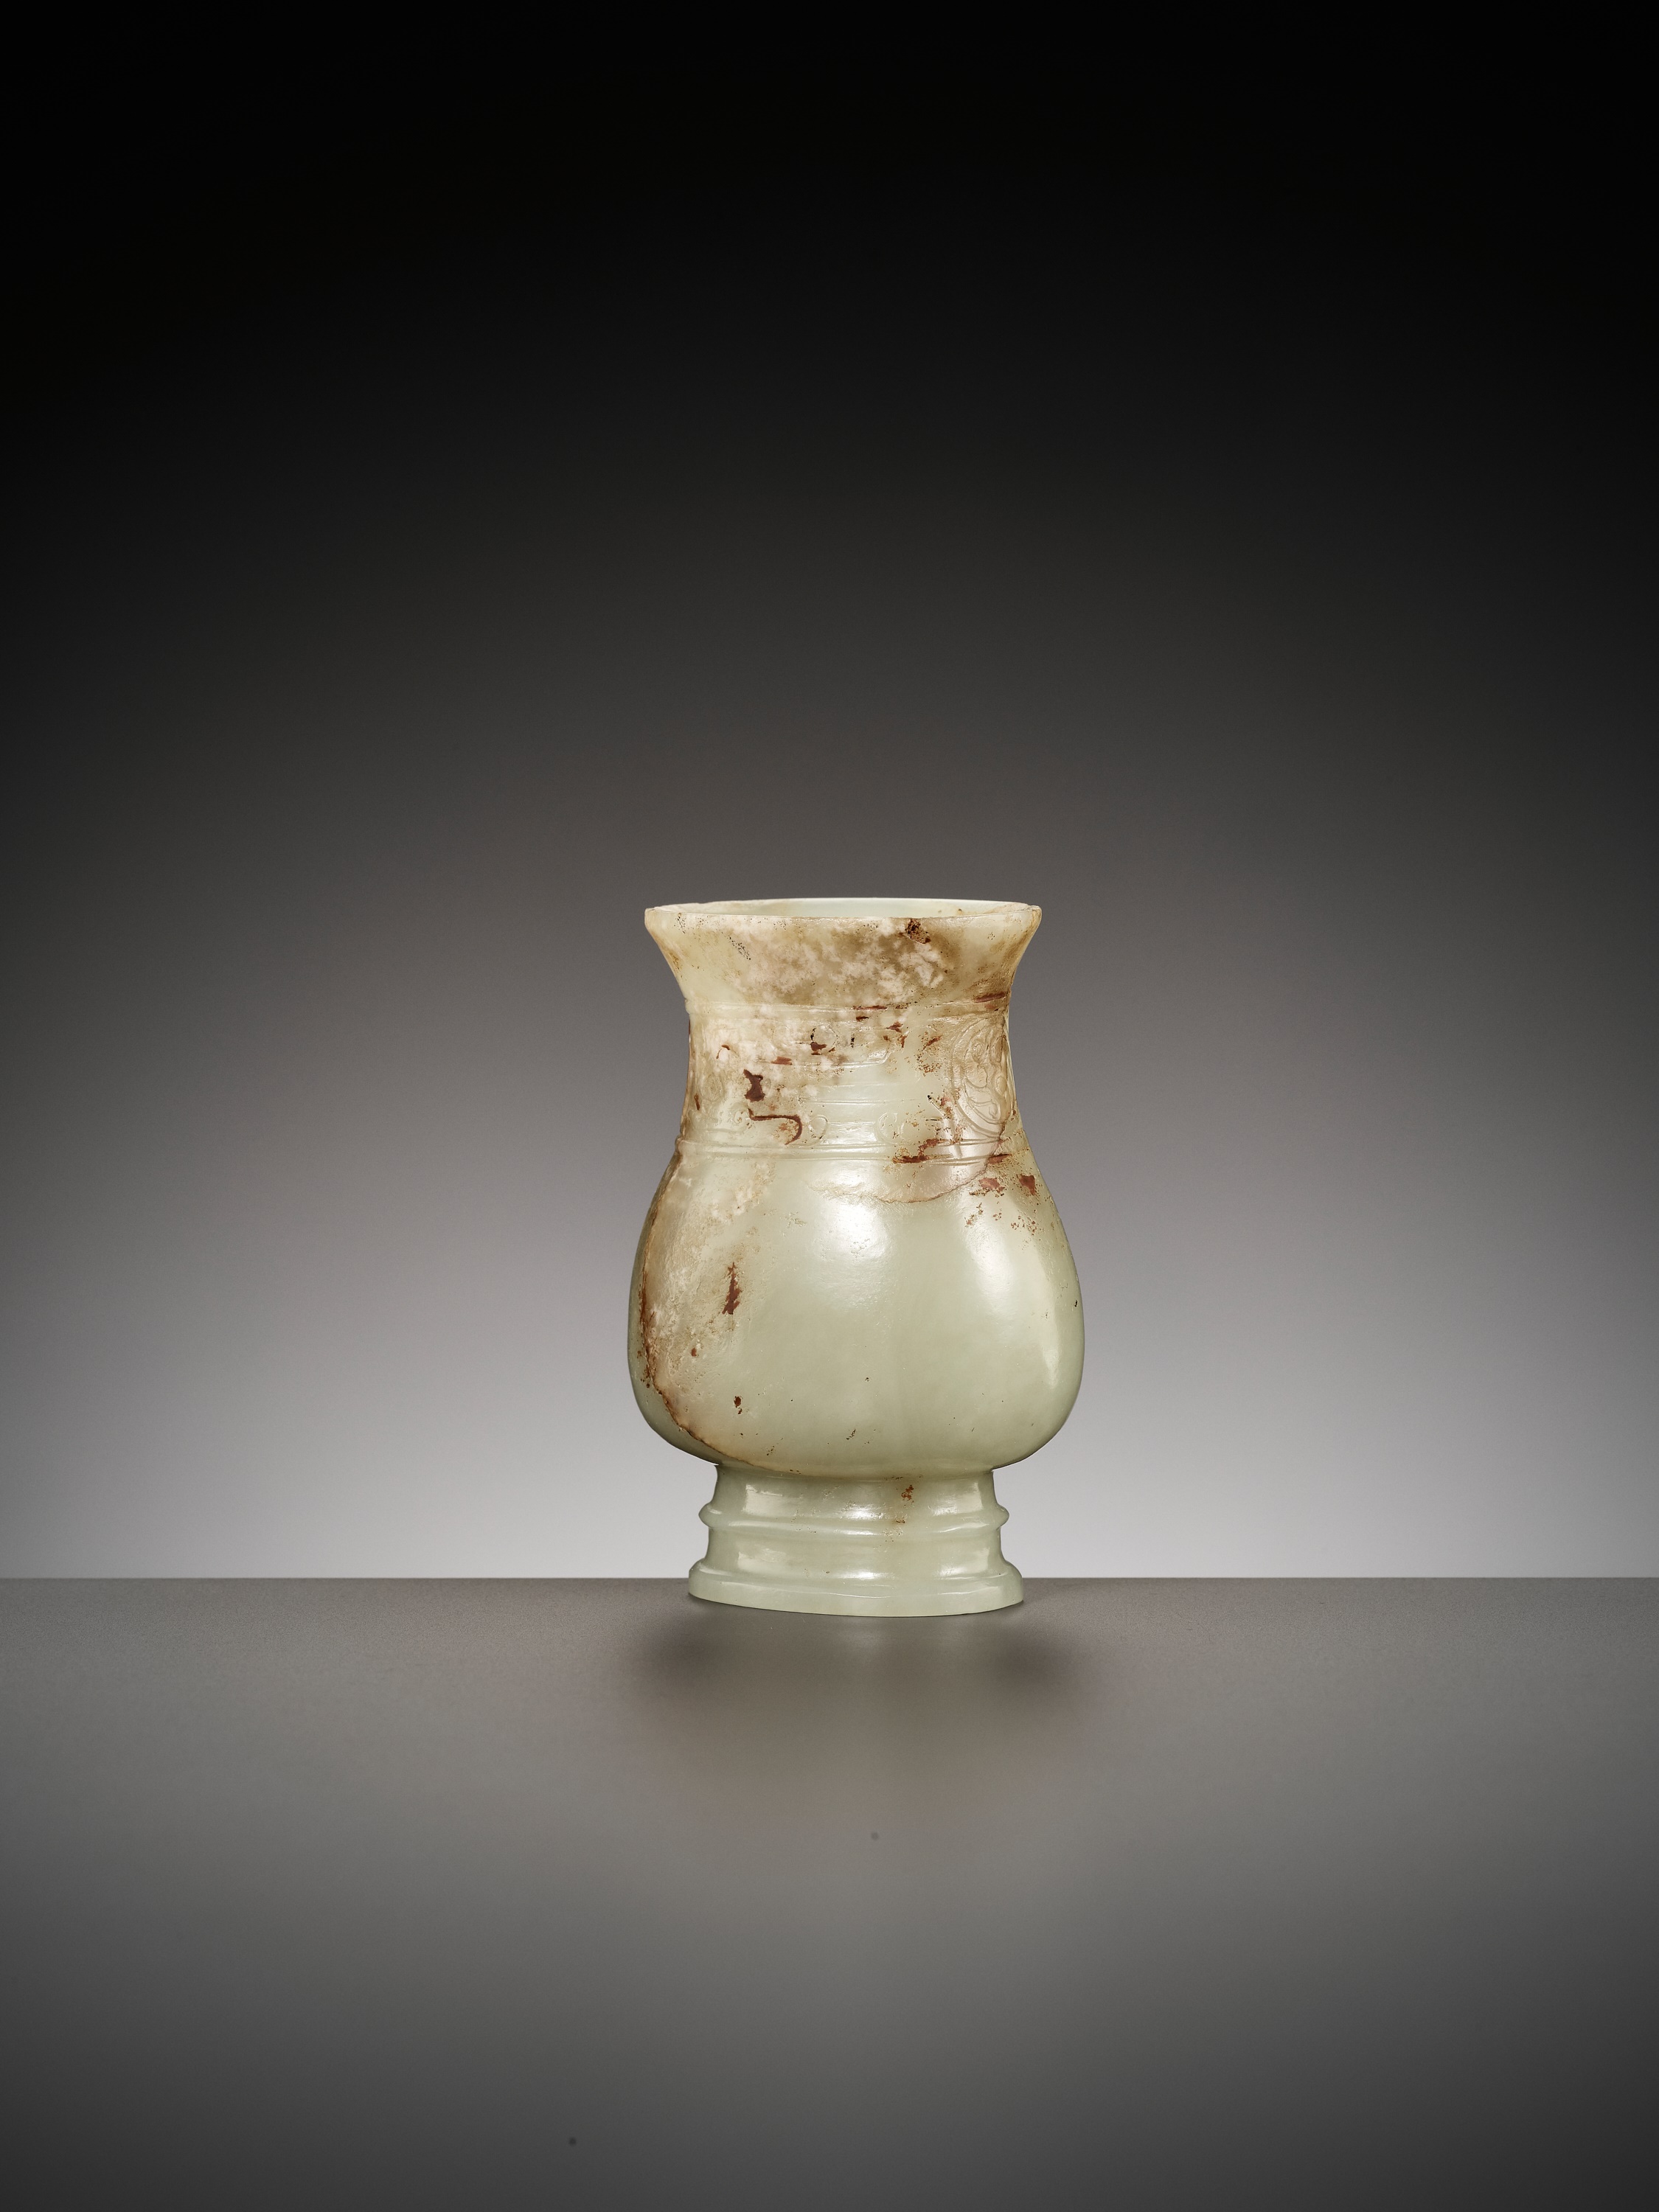 A RARE ARCHAISTIC 'SHANG BRONZE IMITATION' JADE VESSEL, ZHI, LATE SONG TO EARLY MING DYNASTY - Image 12 of 19